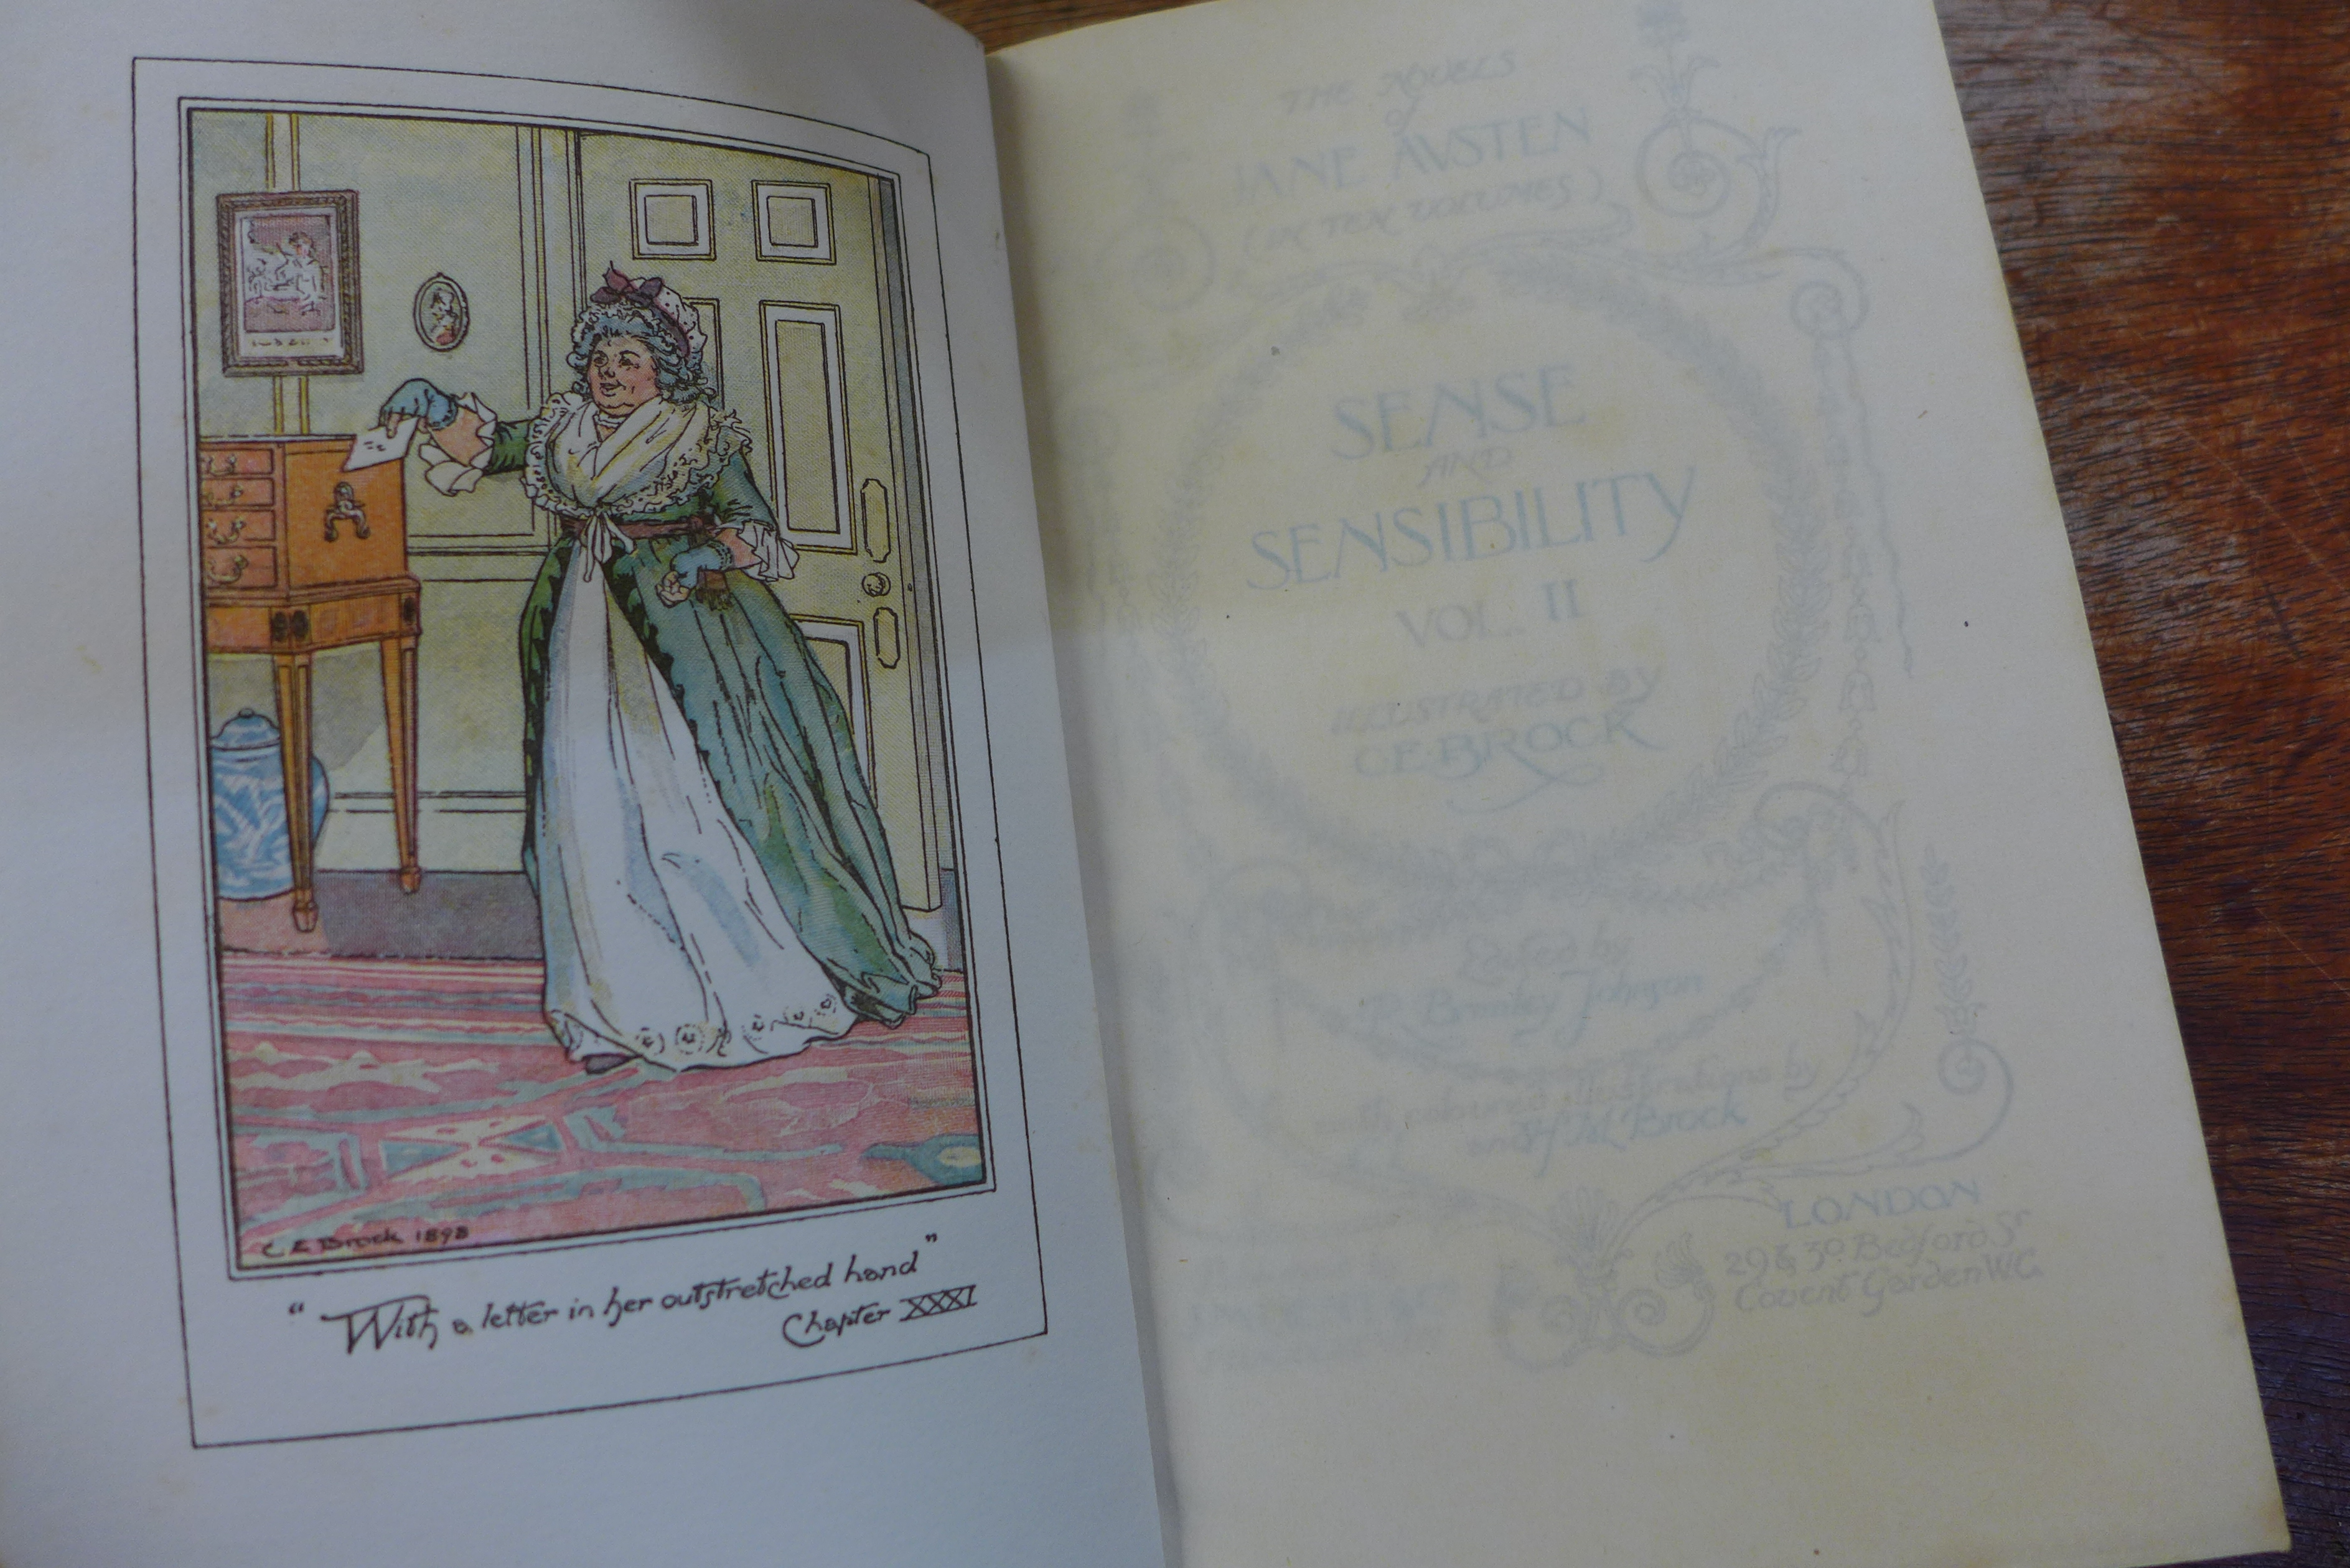 A collection of Shakespeare's Works and a set of ten Jane Austen novels, published by JM Dent & Co., - Image 8 of 12